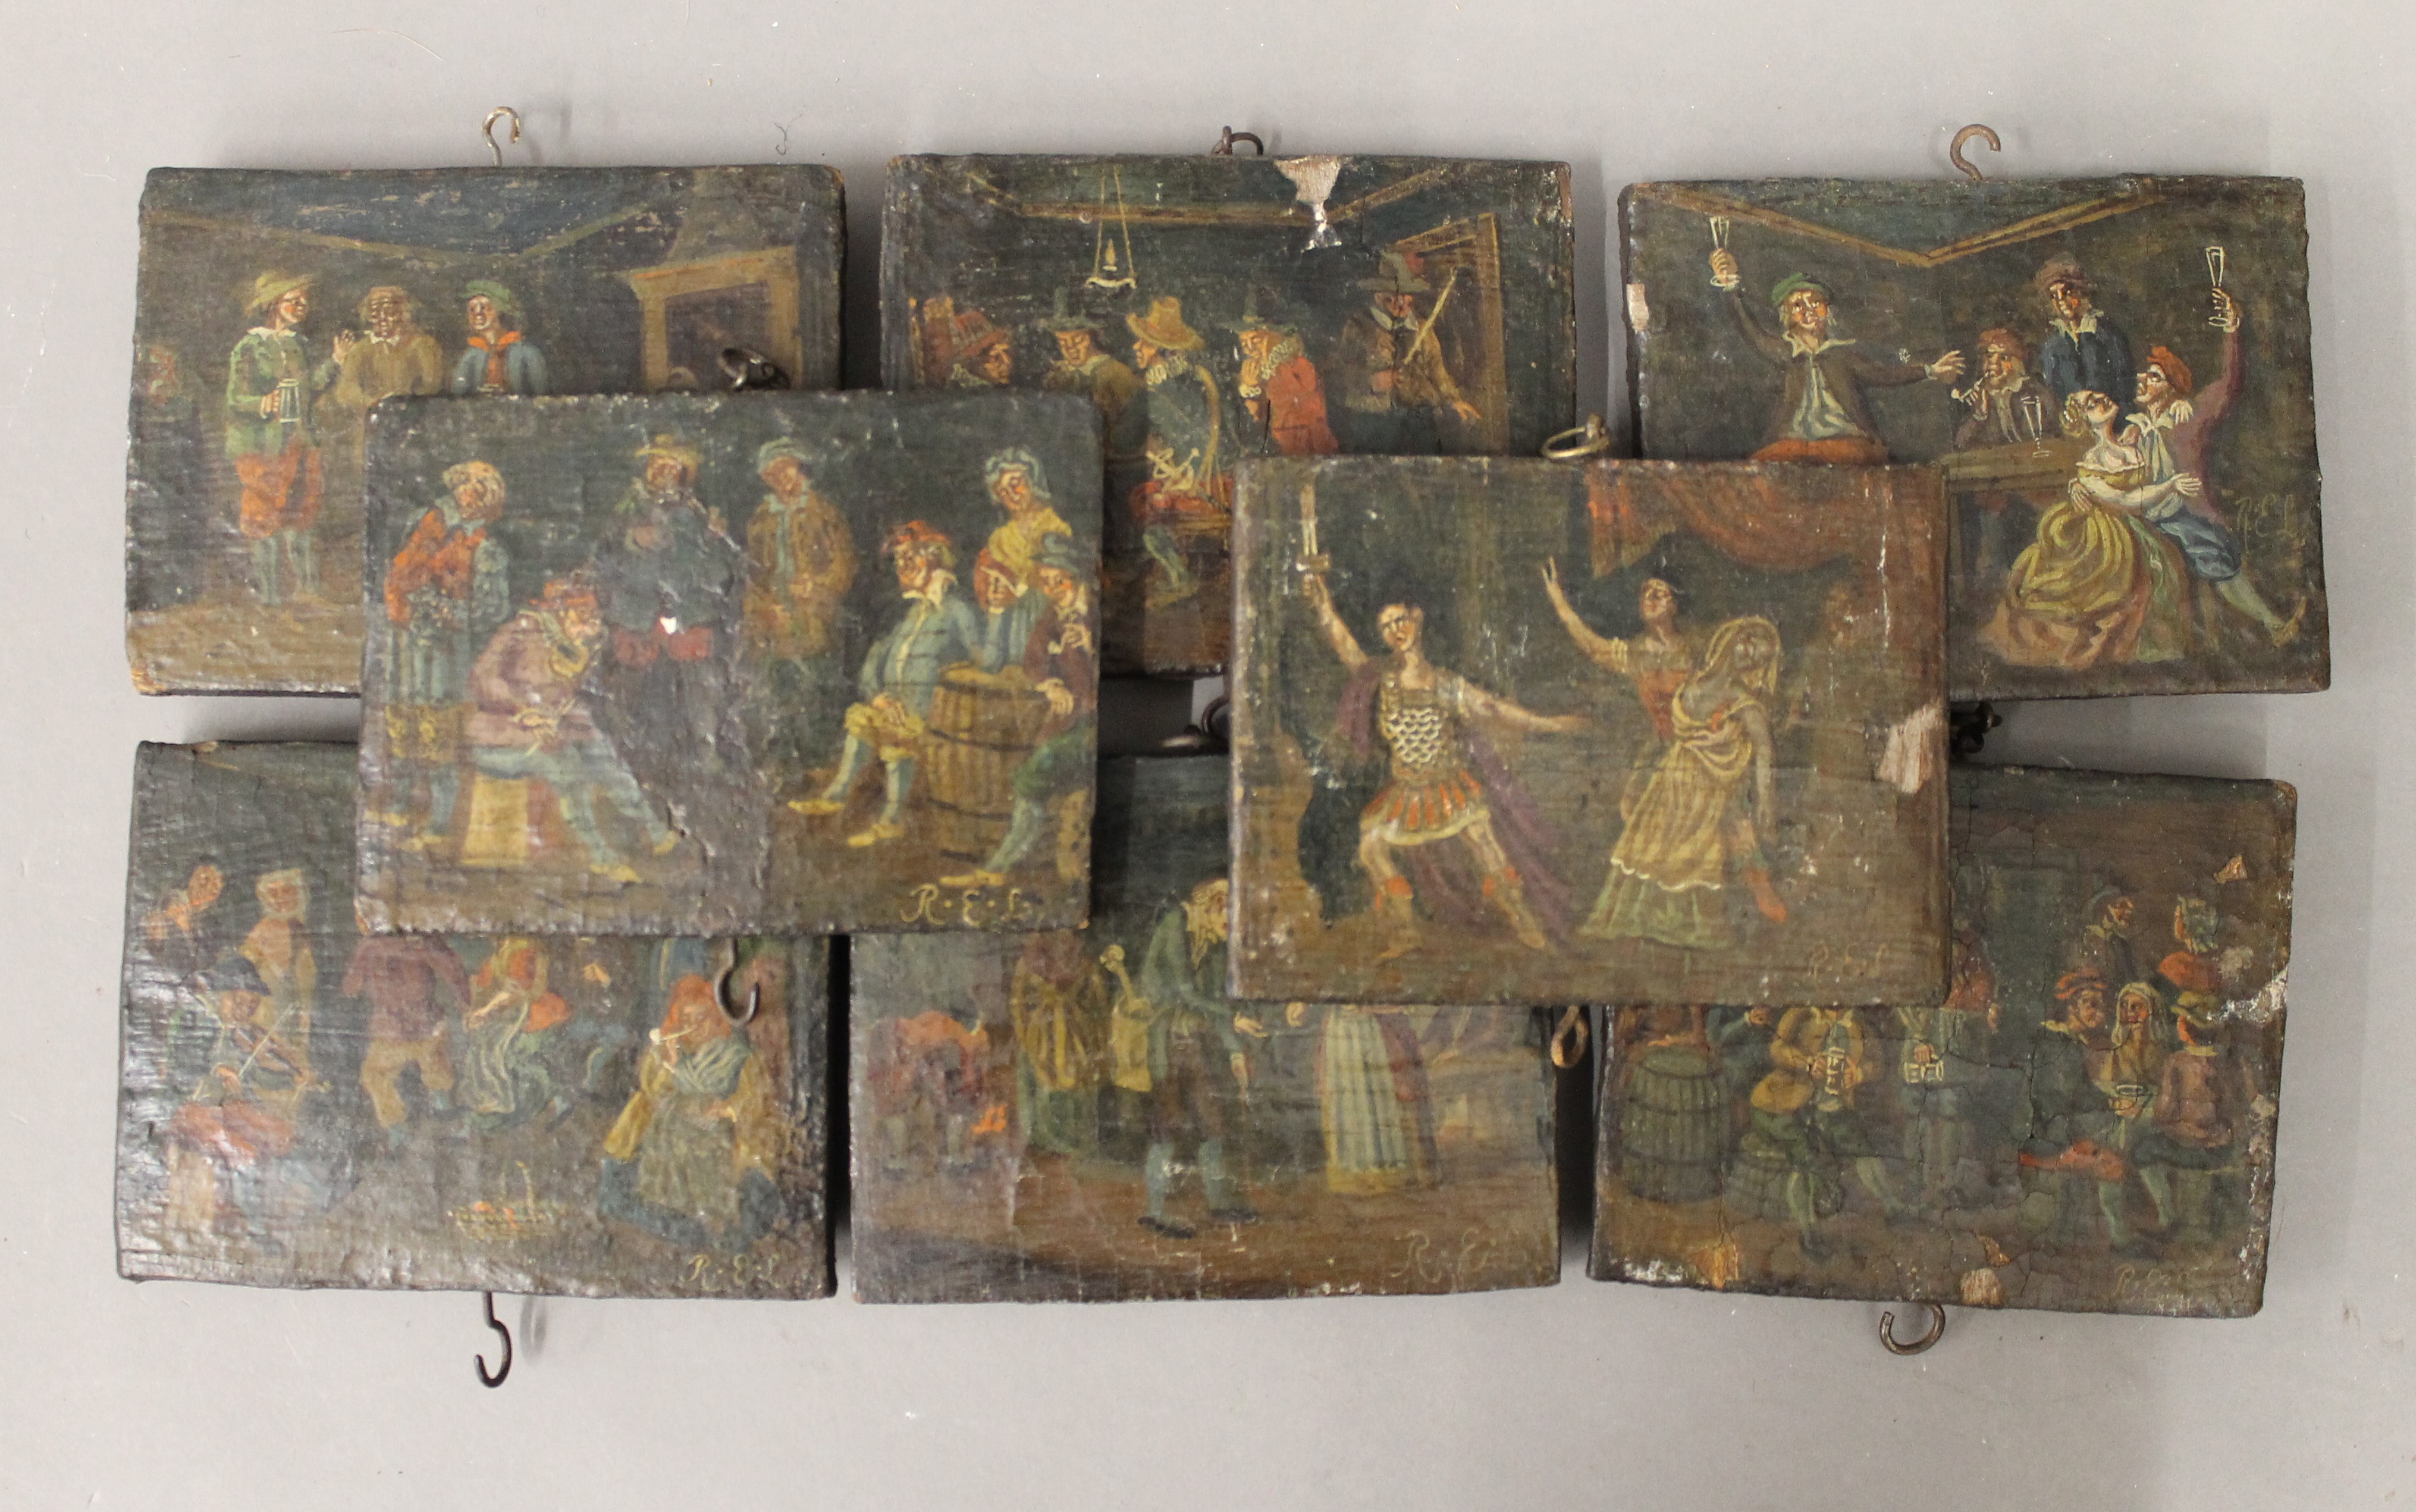 A collection of 18th/19th century miniature paintings on panel, initialled R.E.L.